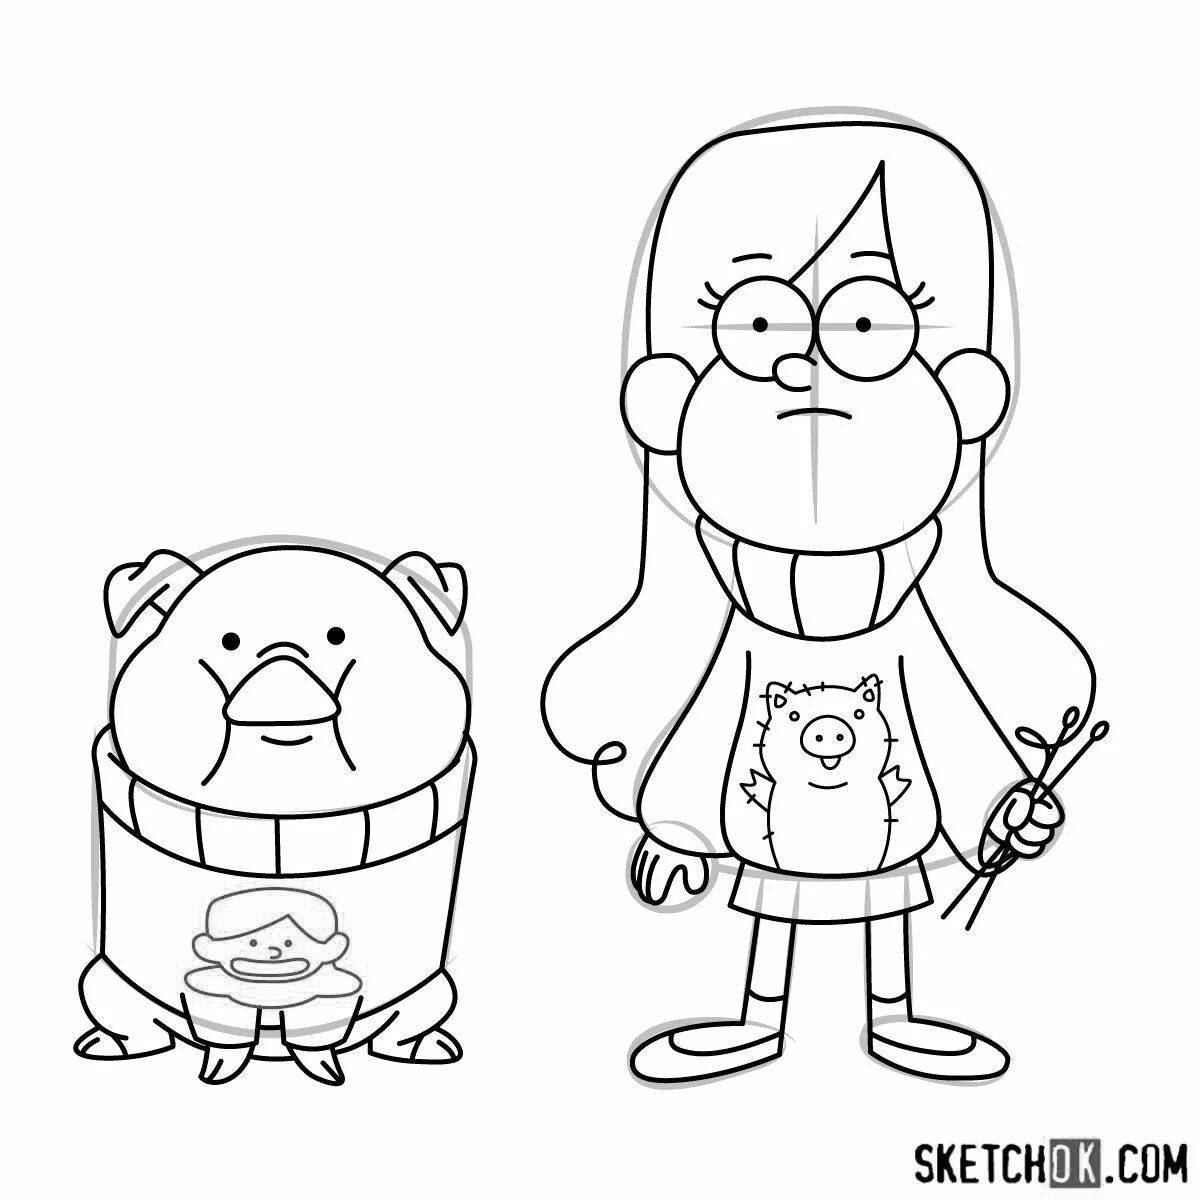 Gravity falls animated characters